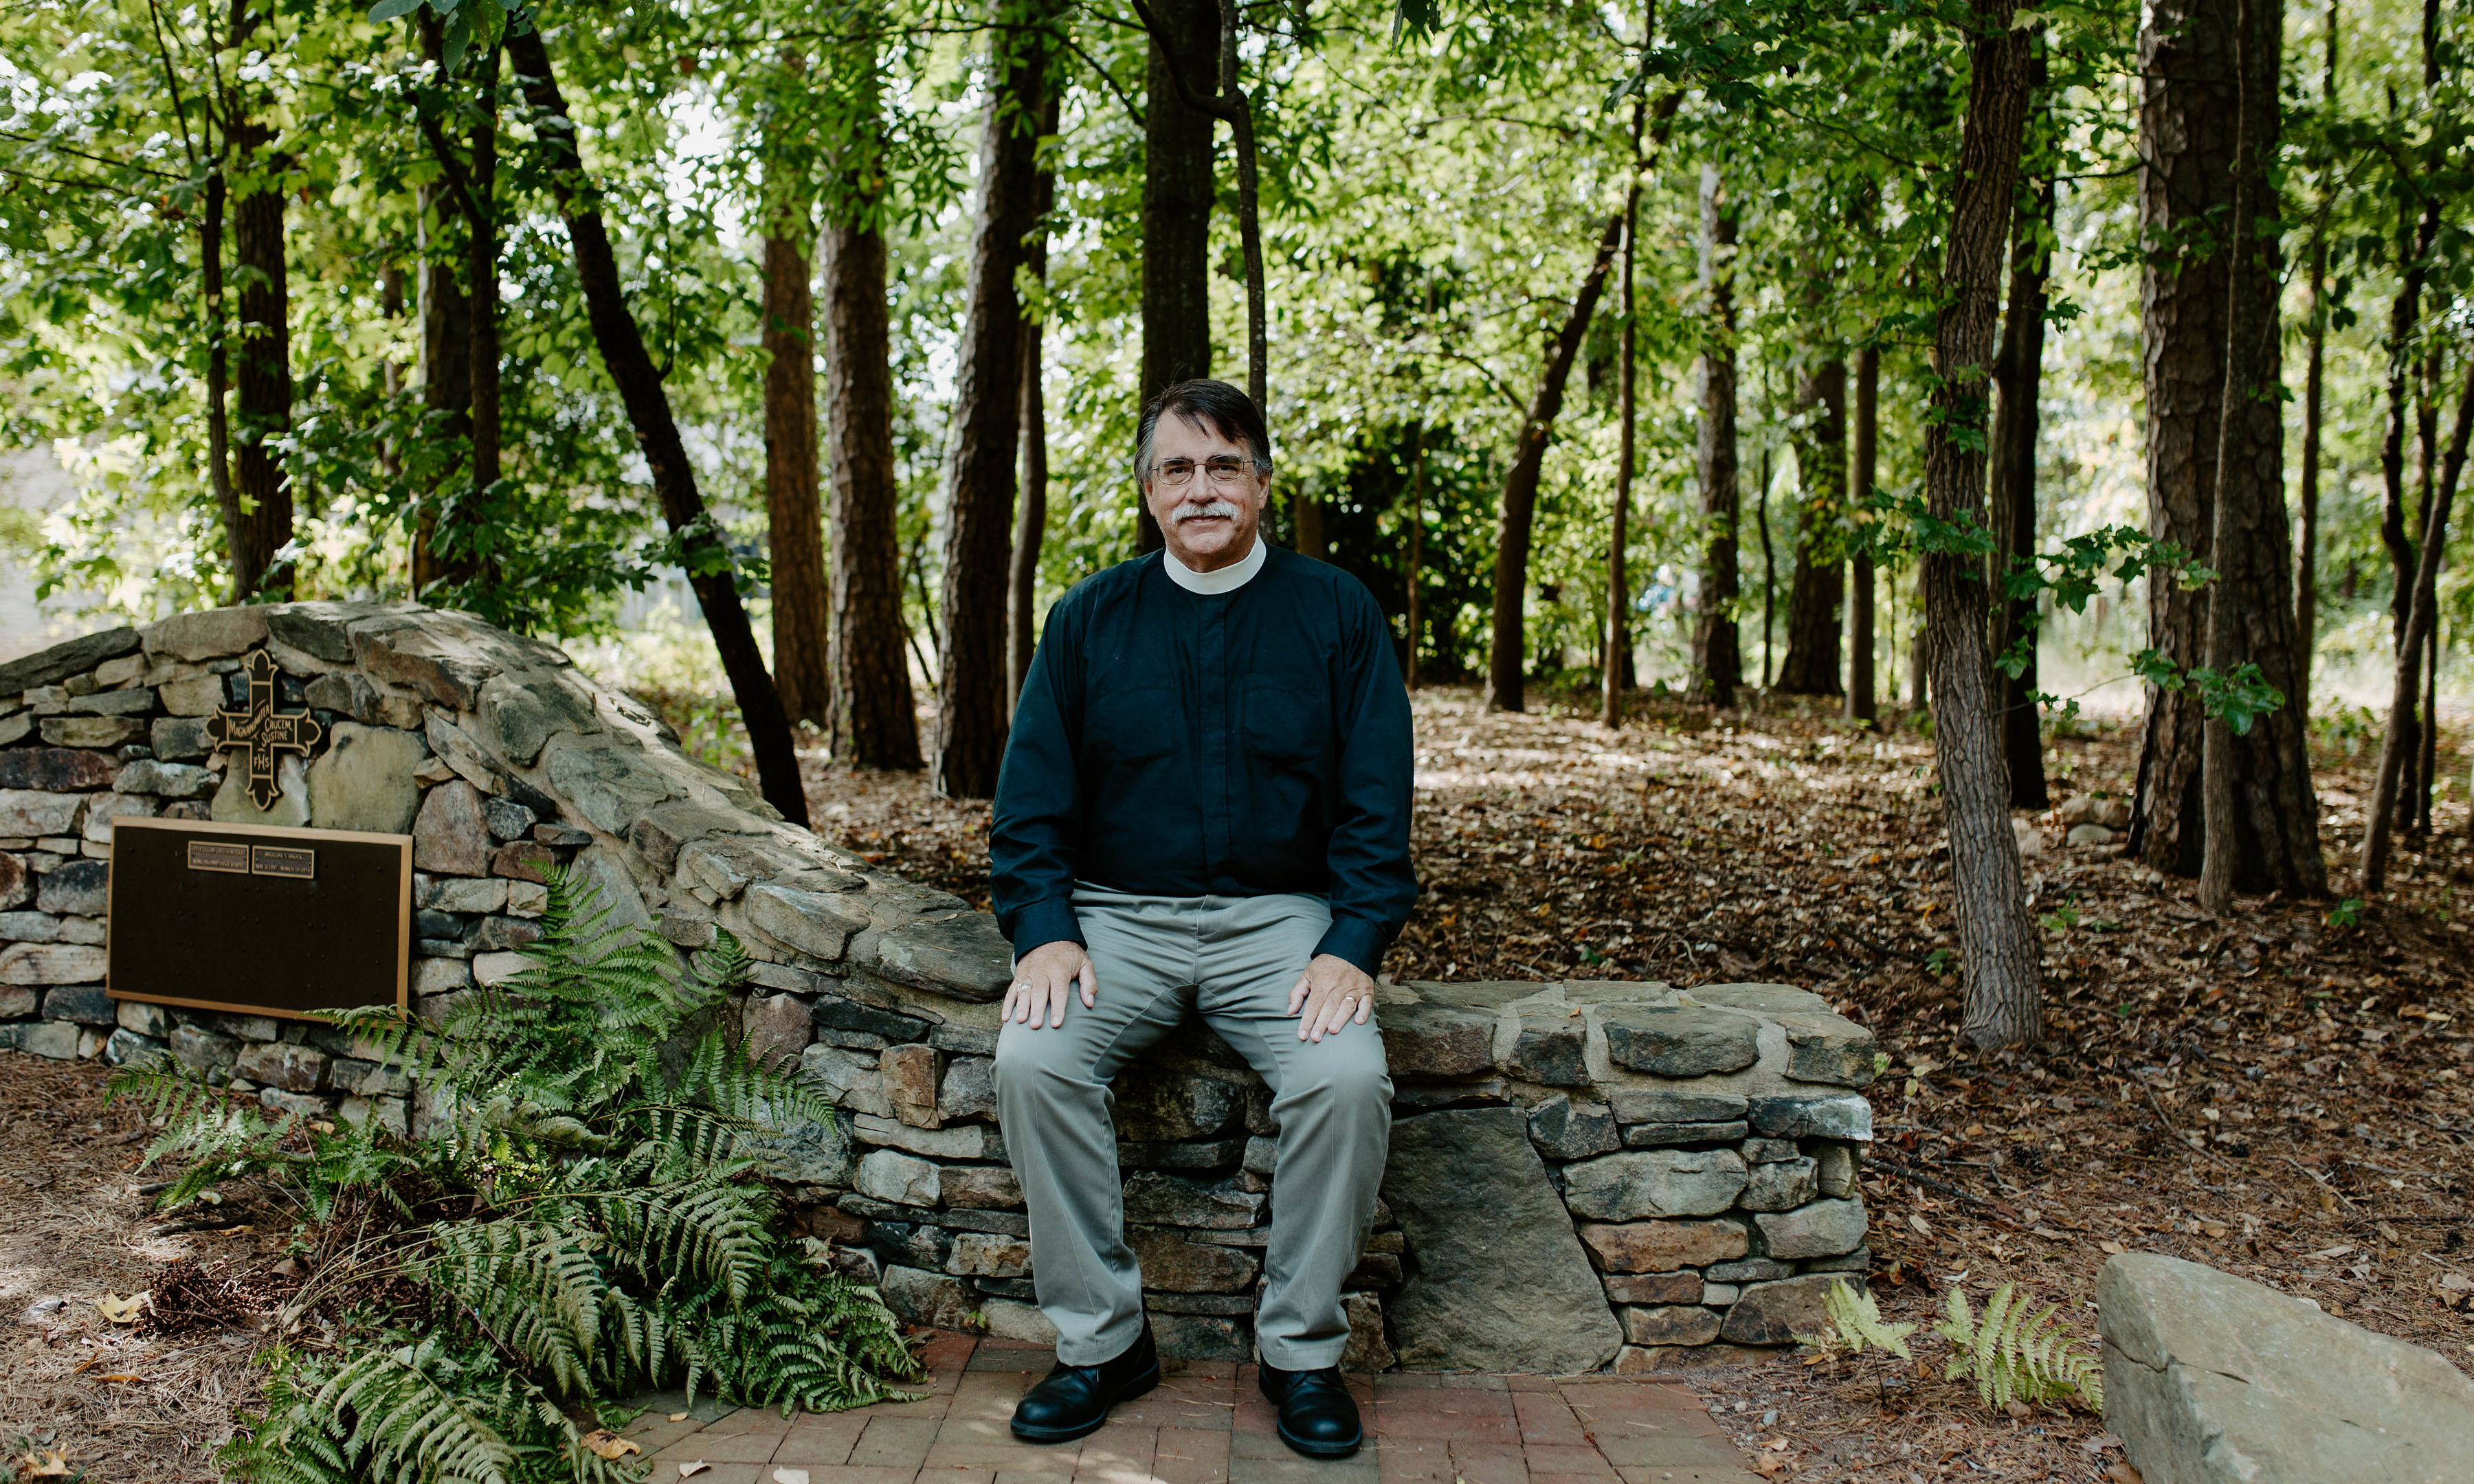 Rev. Rob Brown is a rector at St. Matthew's Episcopal Church in Spartanburg County. Photo by Morgan Yelton